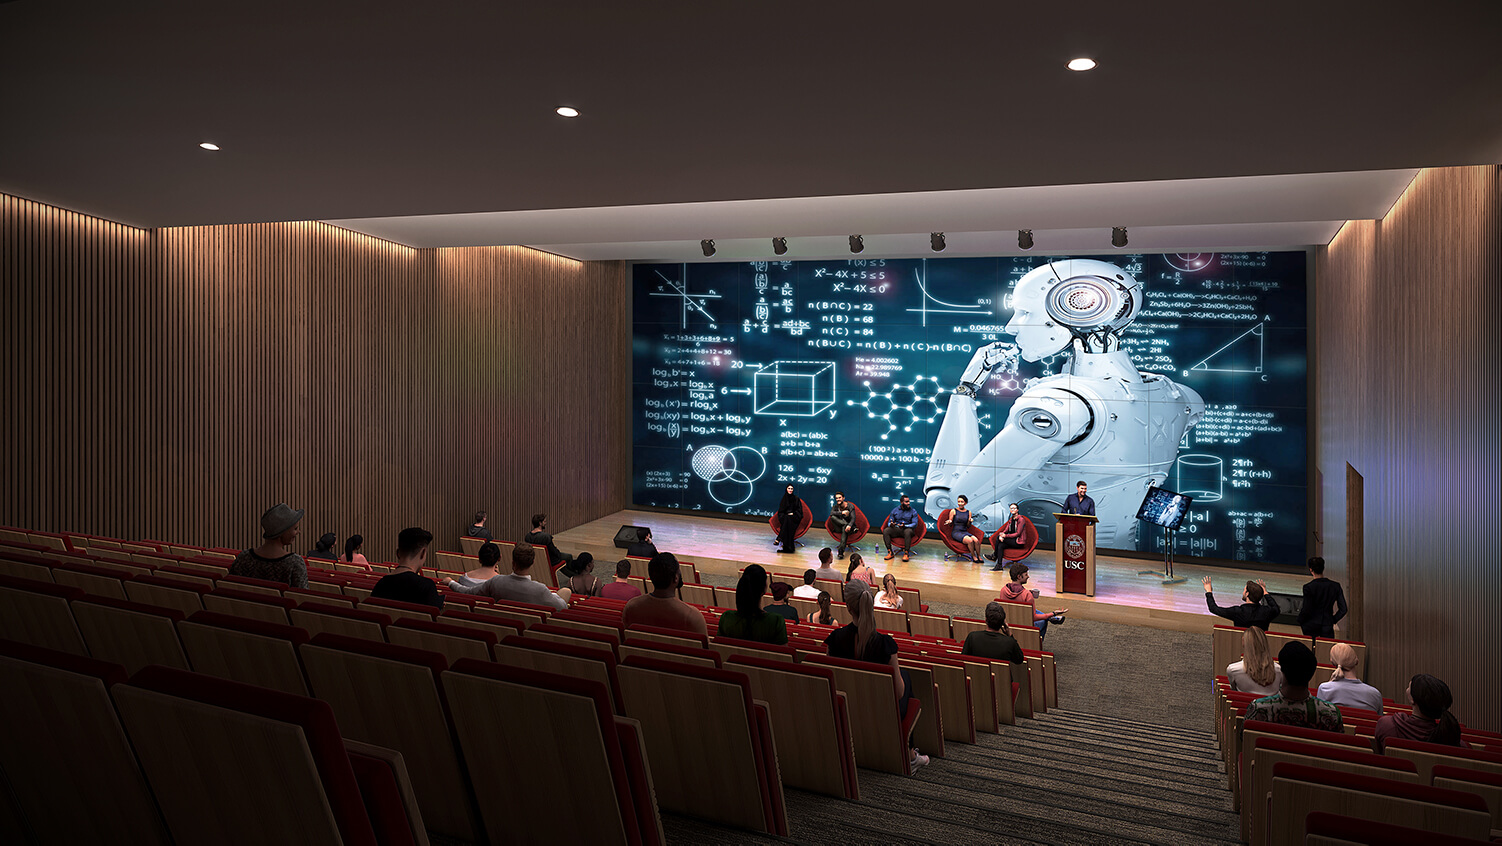 A large auditorium, with people sitting on the stage and an image of a robot projected along the wall behind the stage.